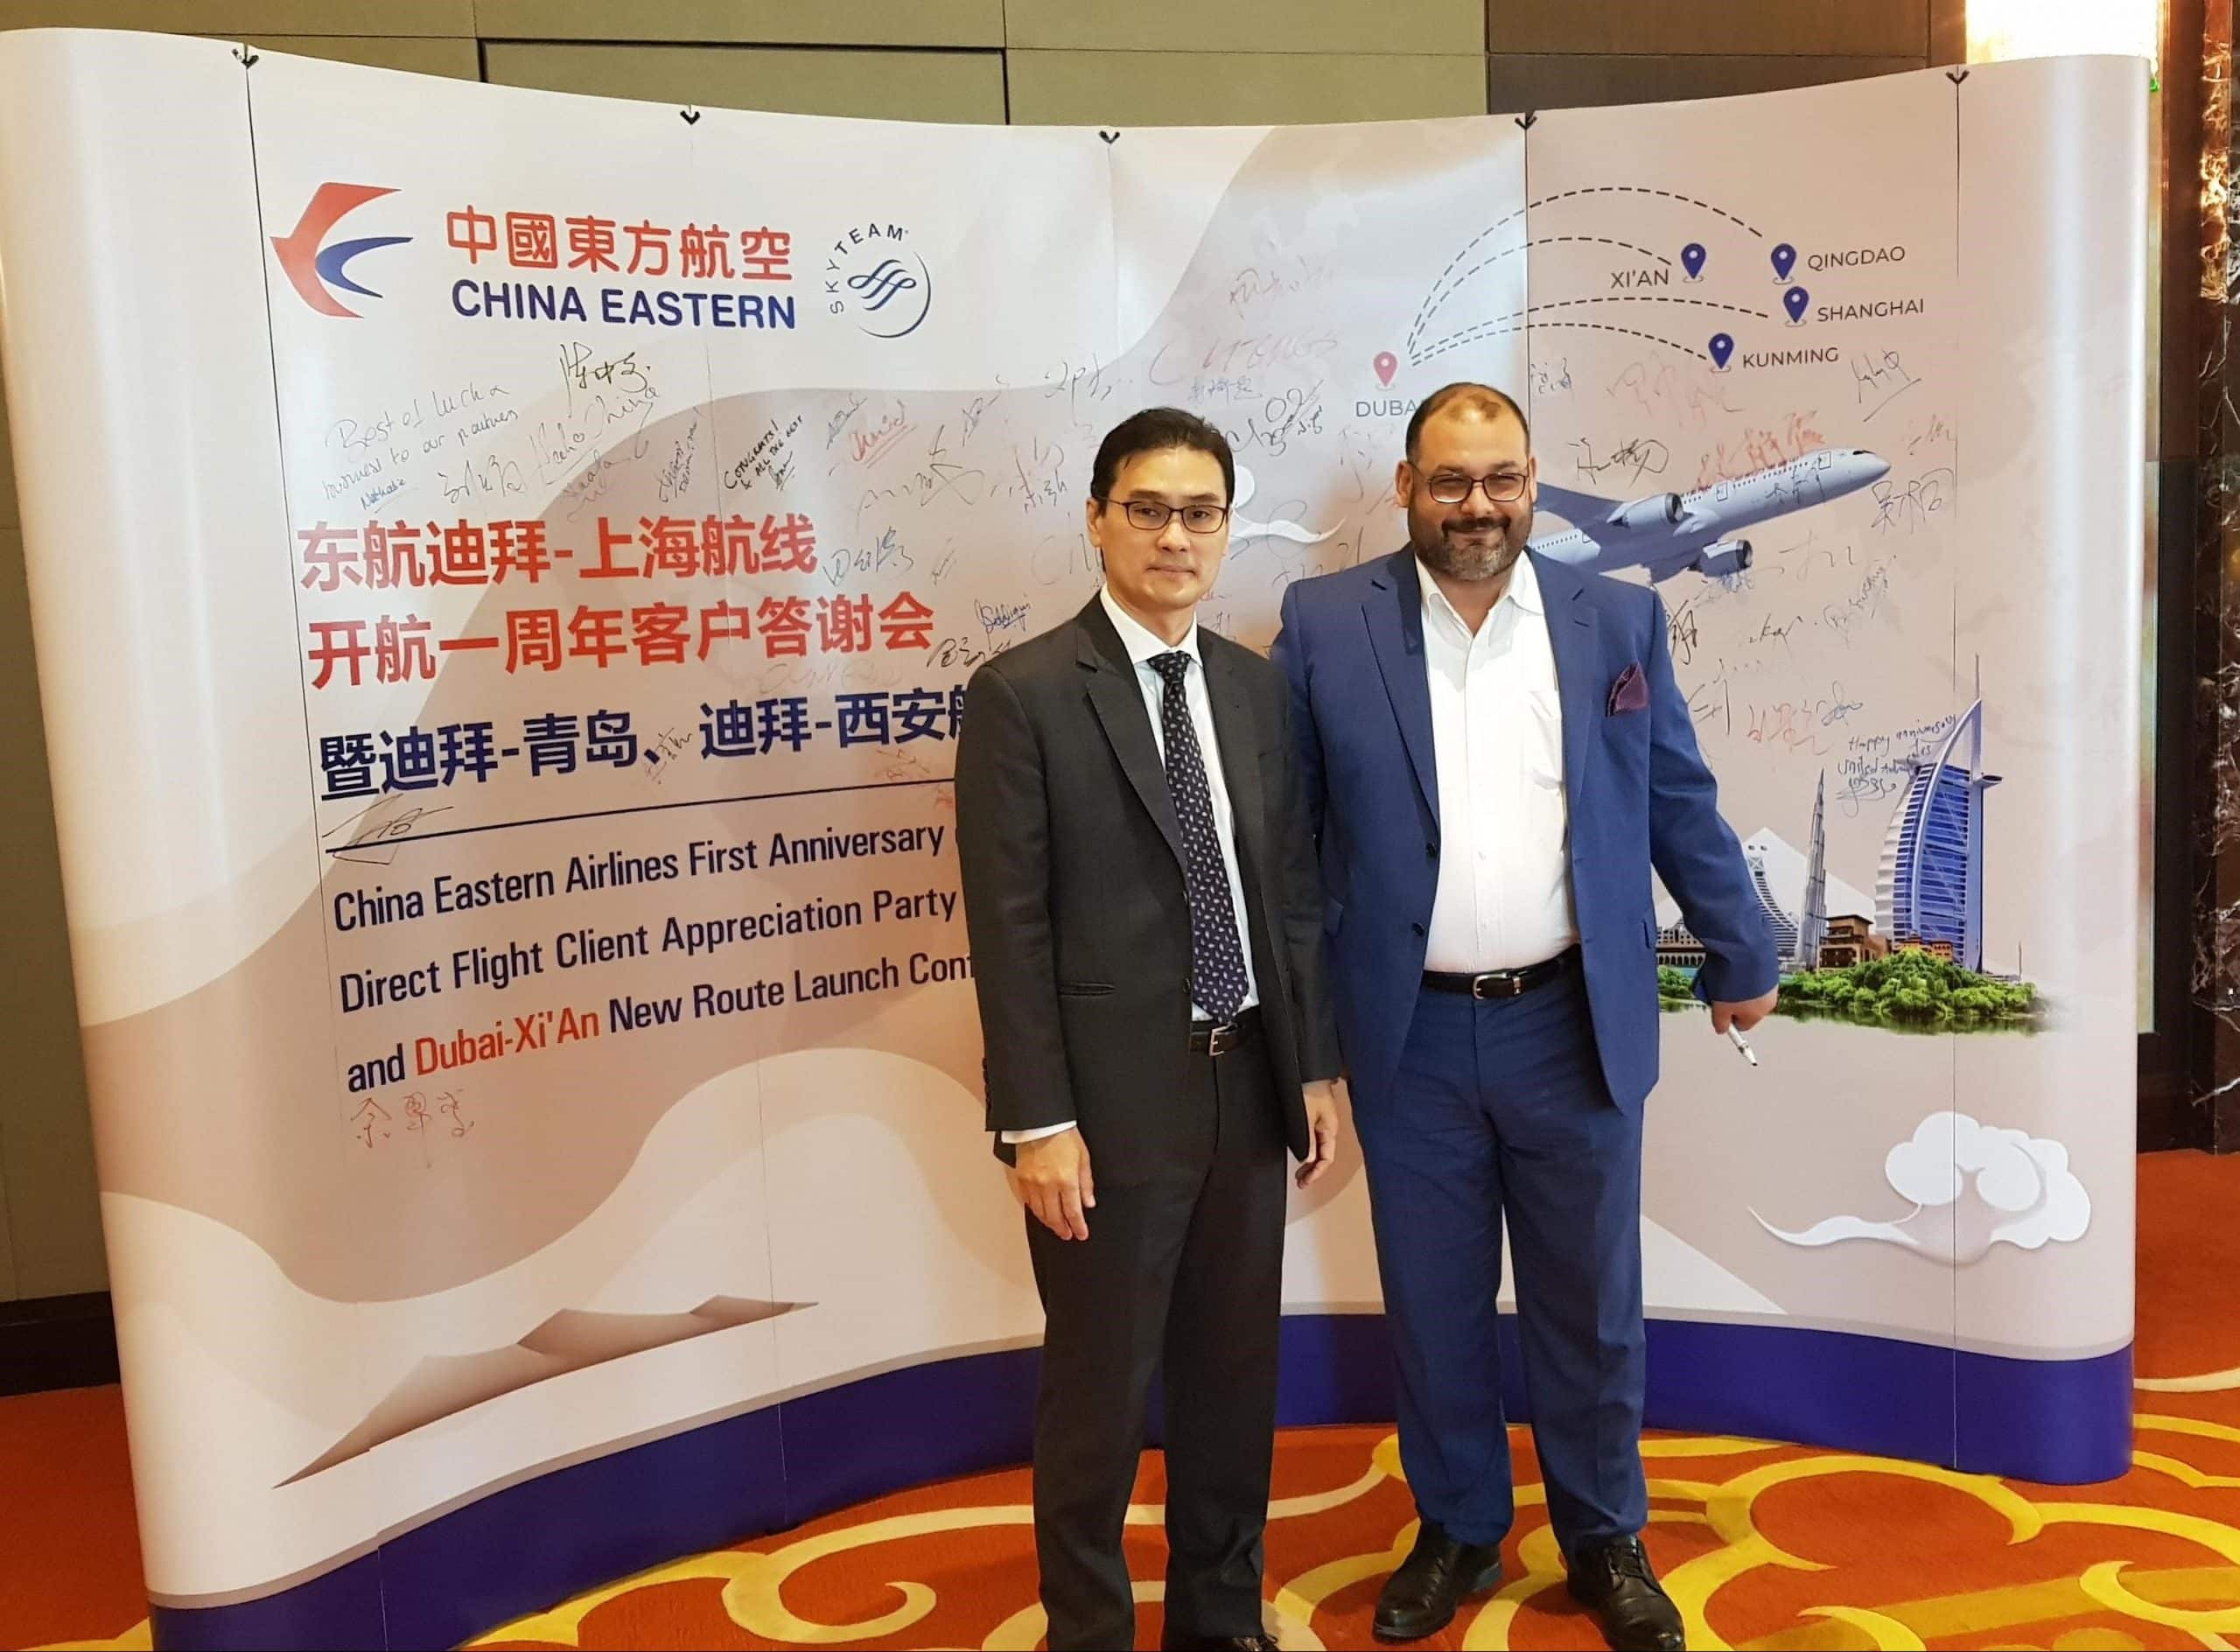 Launching Ceremony of China Eastern Airline’s new Dubai-Qingdao and Dubai-Xi’an Flight Routes